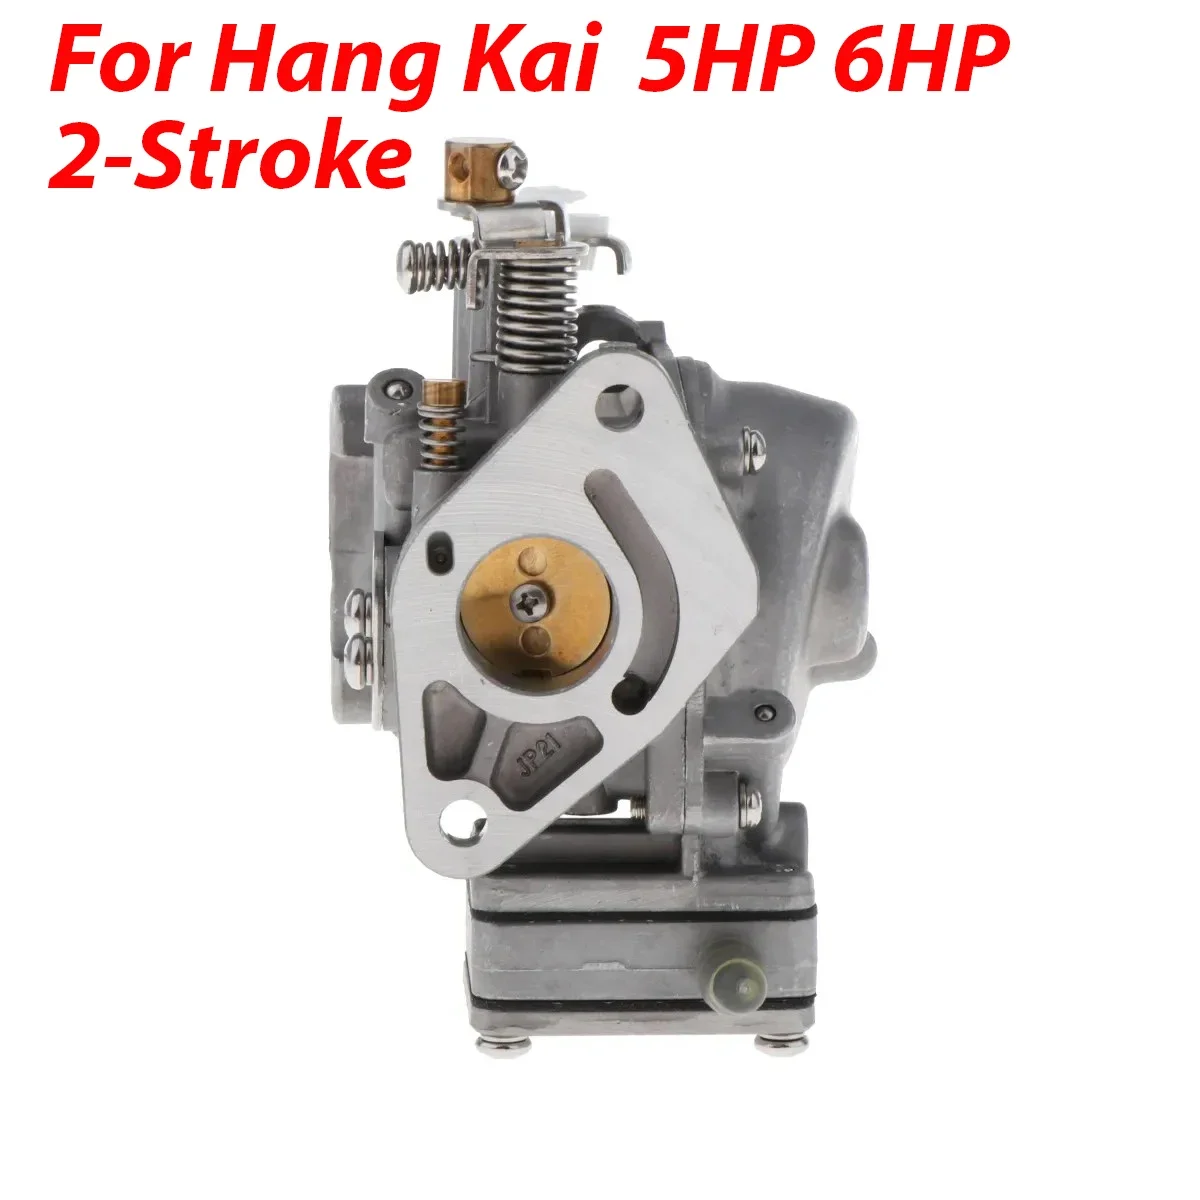 

Boat Outboard Engine Carburetor Assy For Hang Kai 5HP 6HP 2-Stroke Outboard Motor Boat Accessories